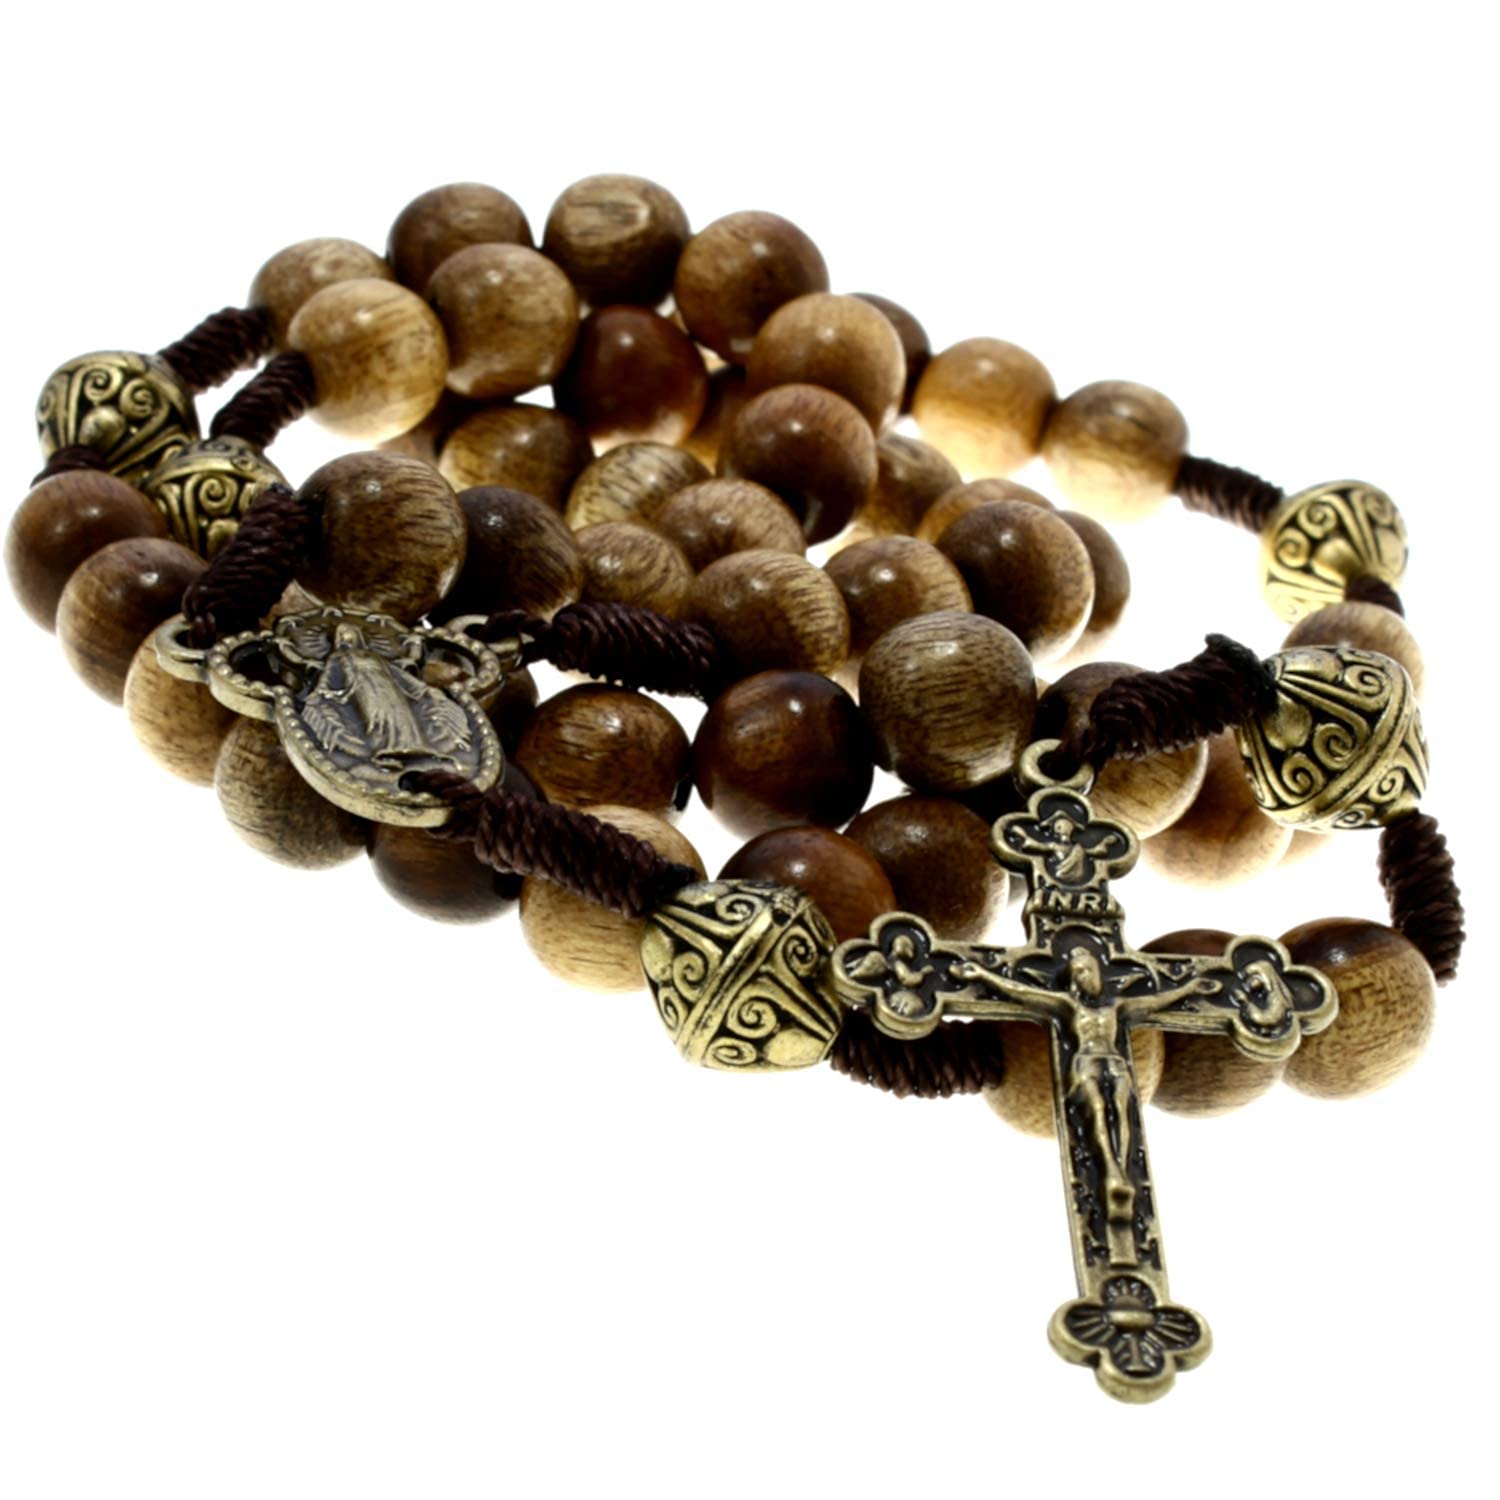 Alexander Castle Our Father Solid Wooden Rosary Beads (Handmade - Brazilian Walnut) with Miraculous Medal Junction - Comes in Velour Gift Pouch